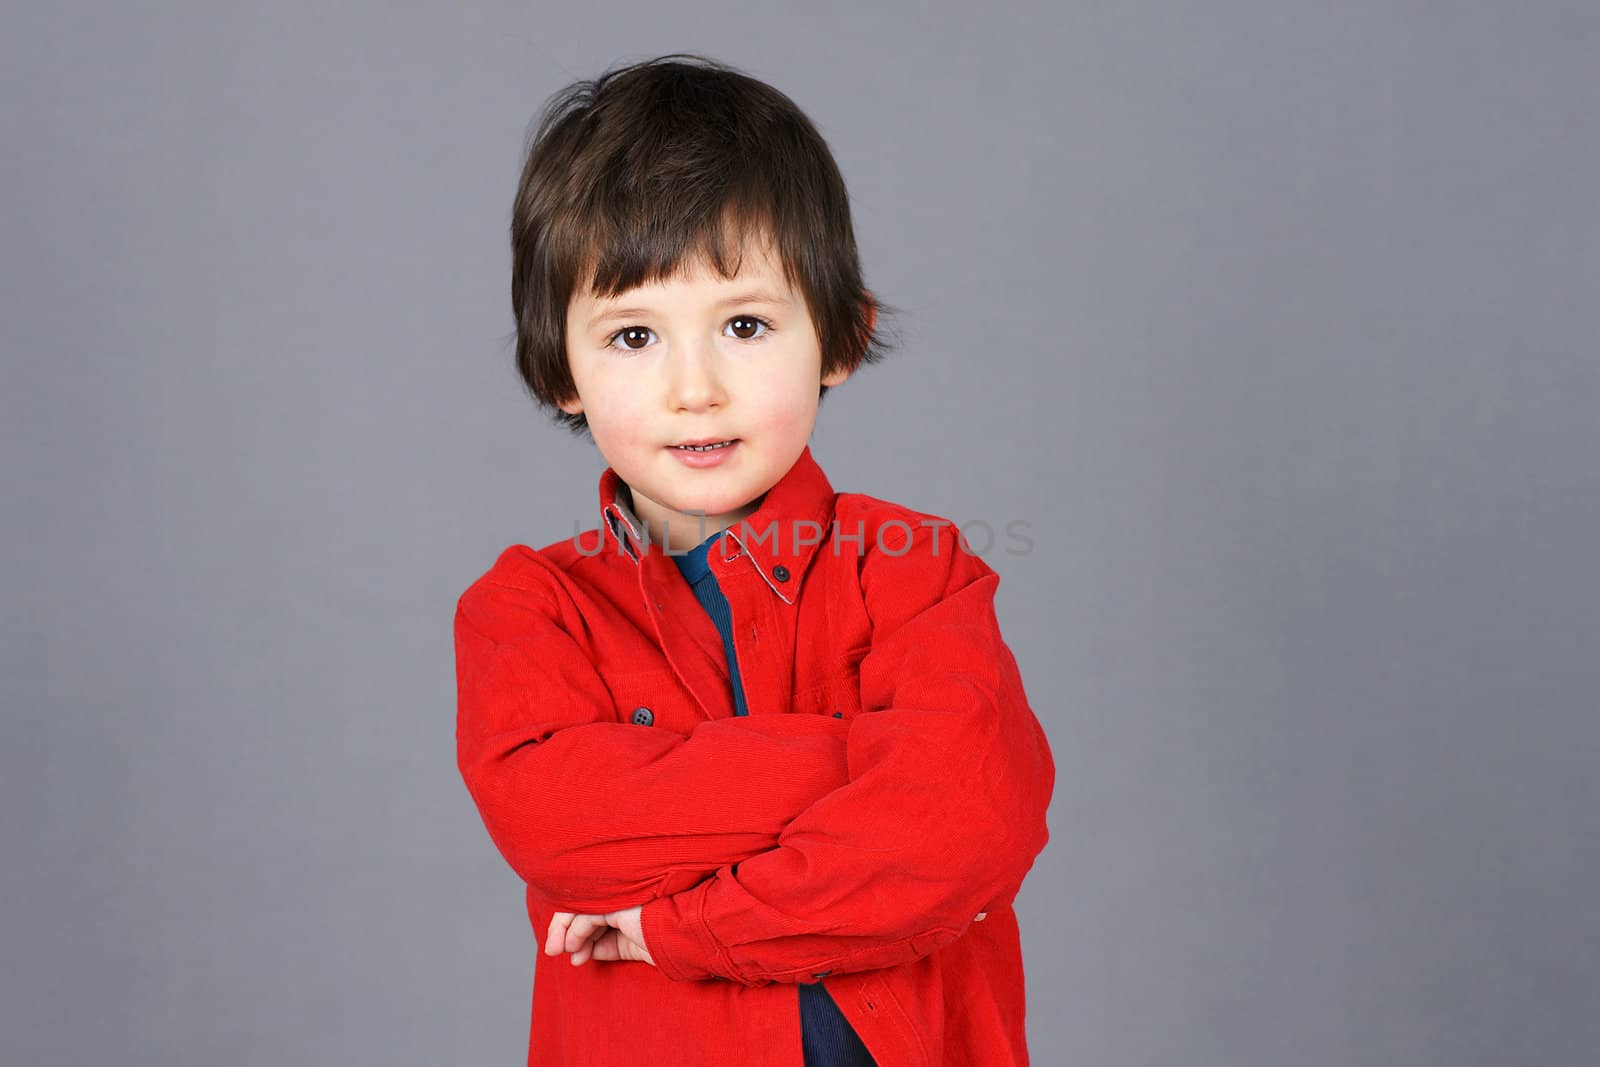 Boy in red with crossed arms by Mirage3